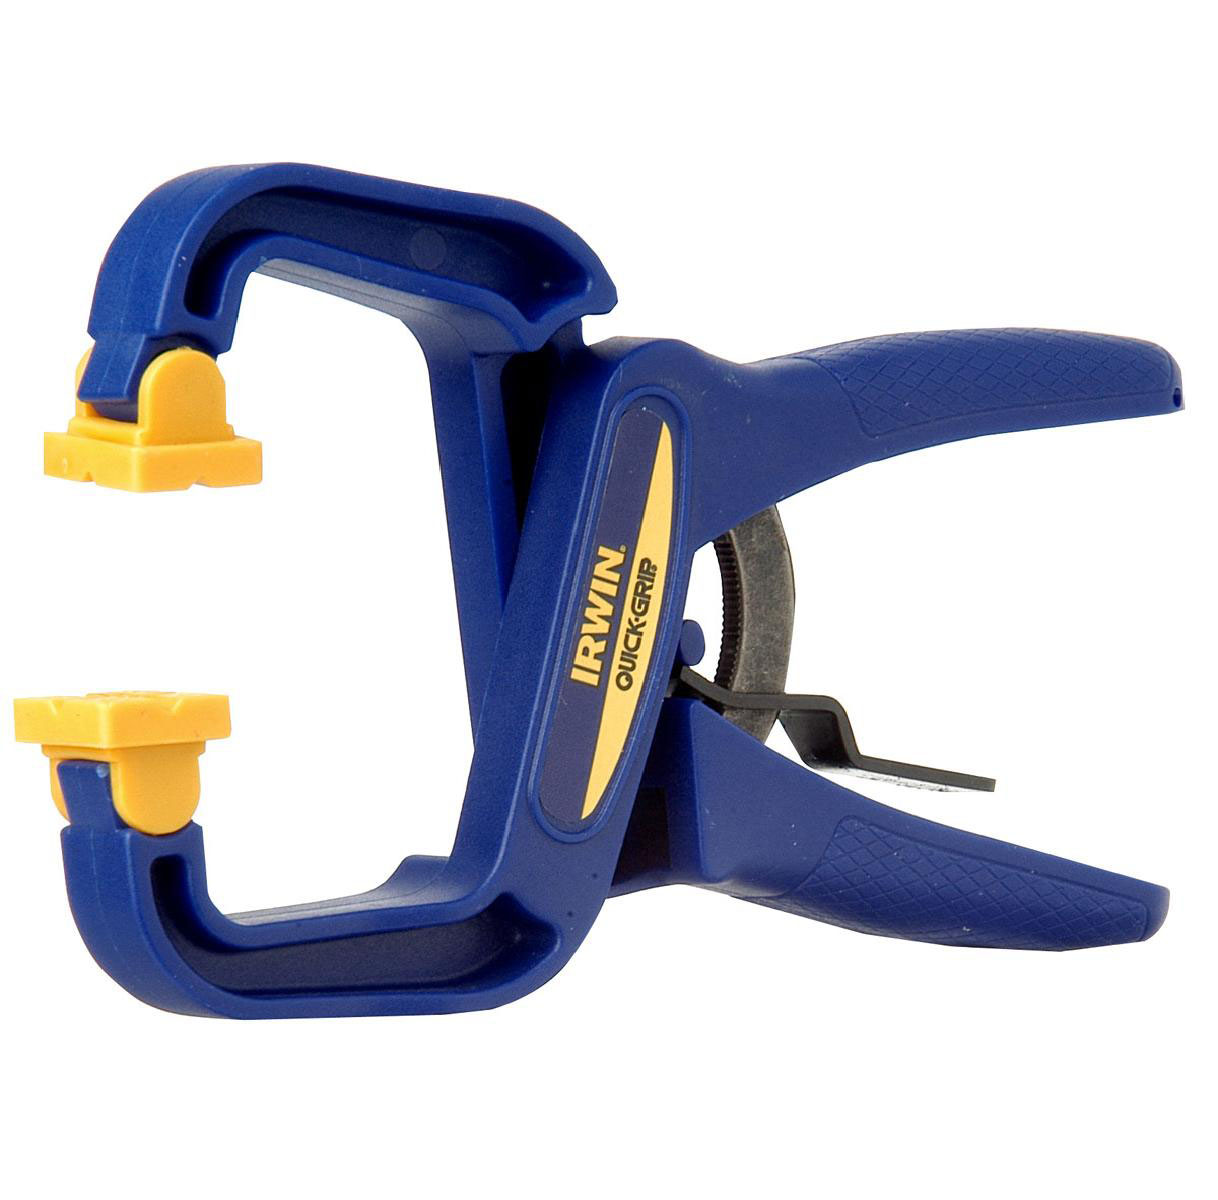 Quick Grip 12-30 F woodworking Clamp Clip Heavy Duty Wood Carpenter Tool  Clamp